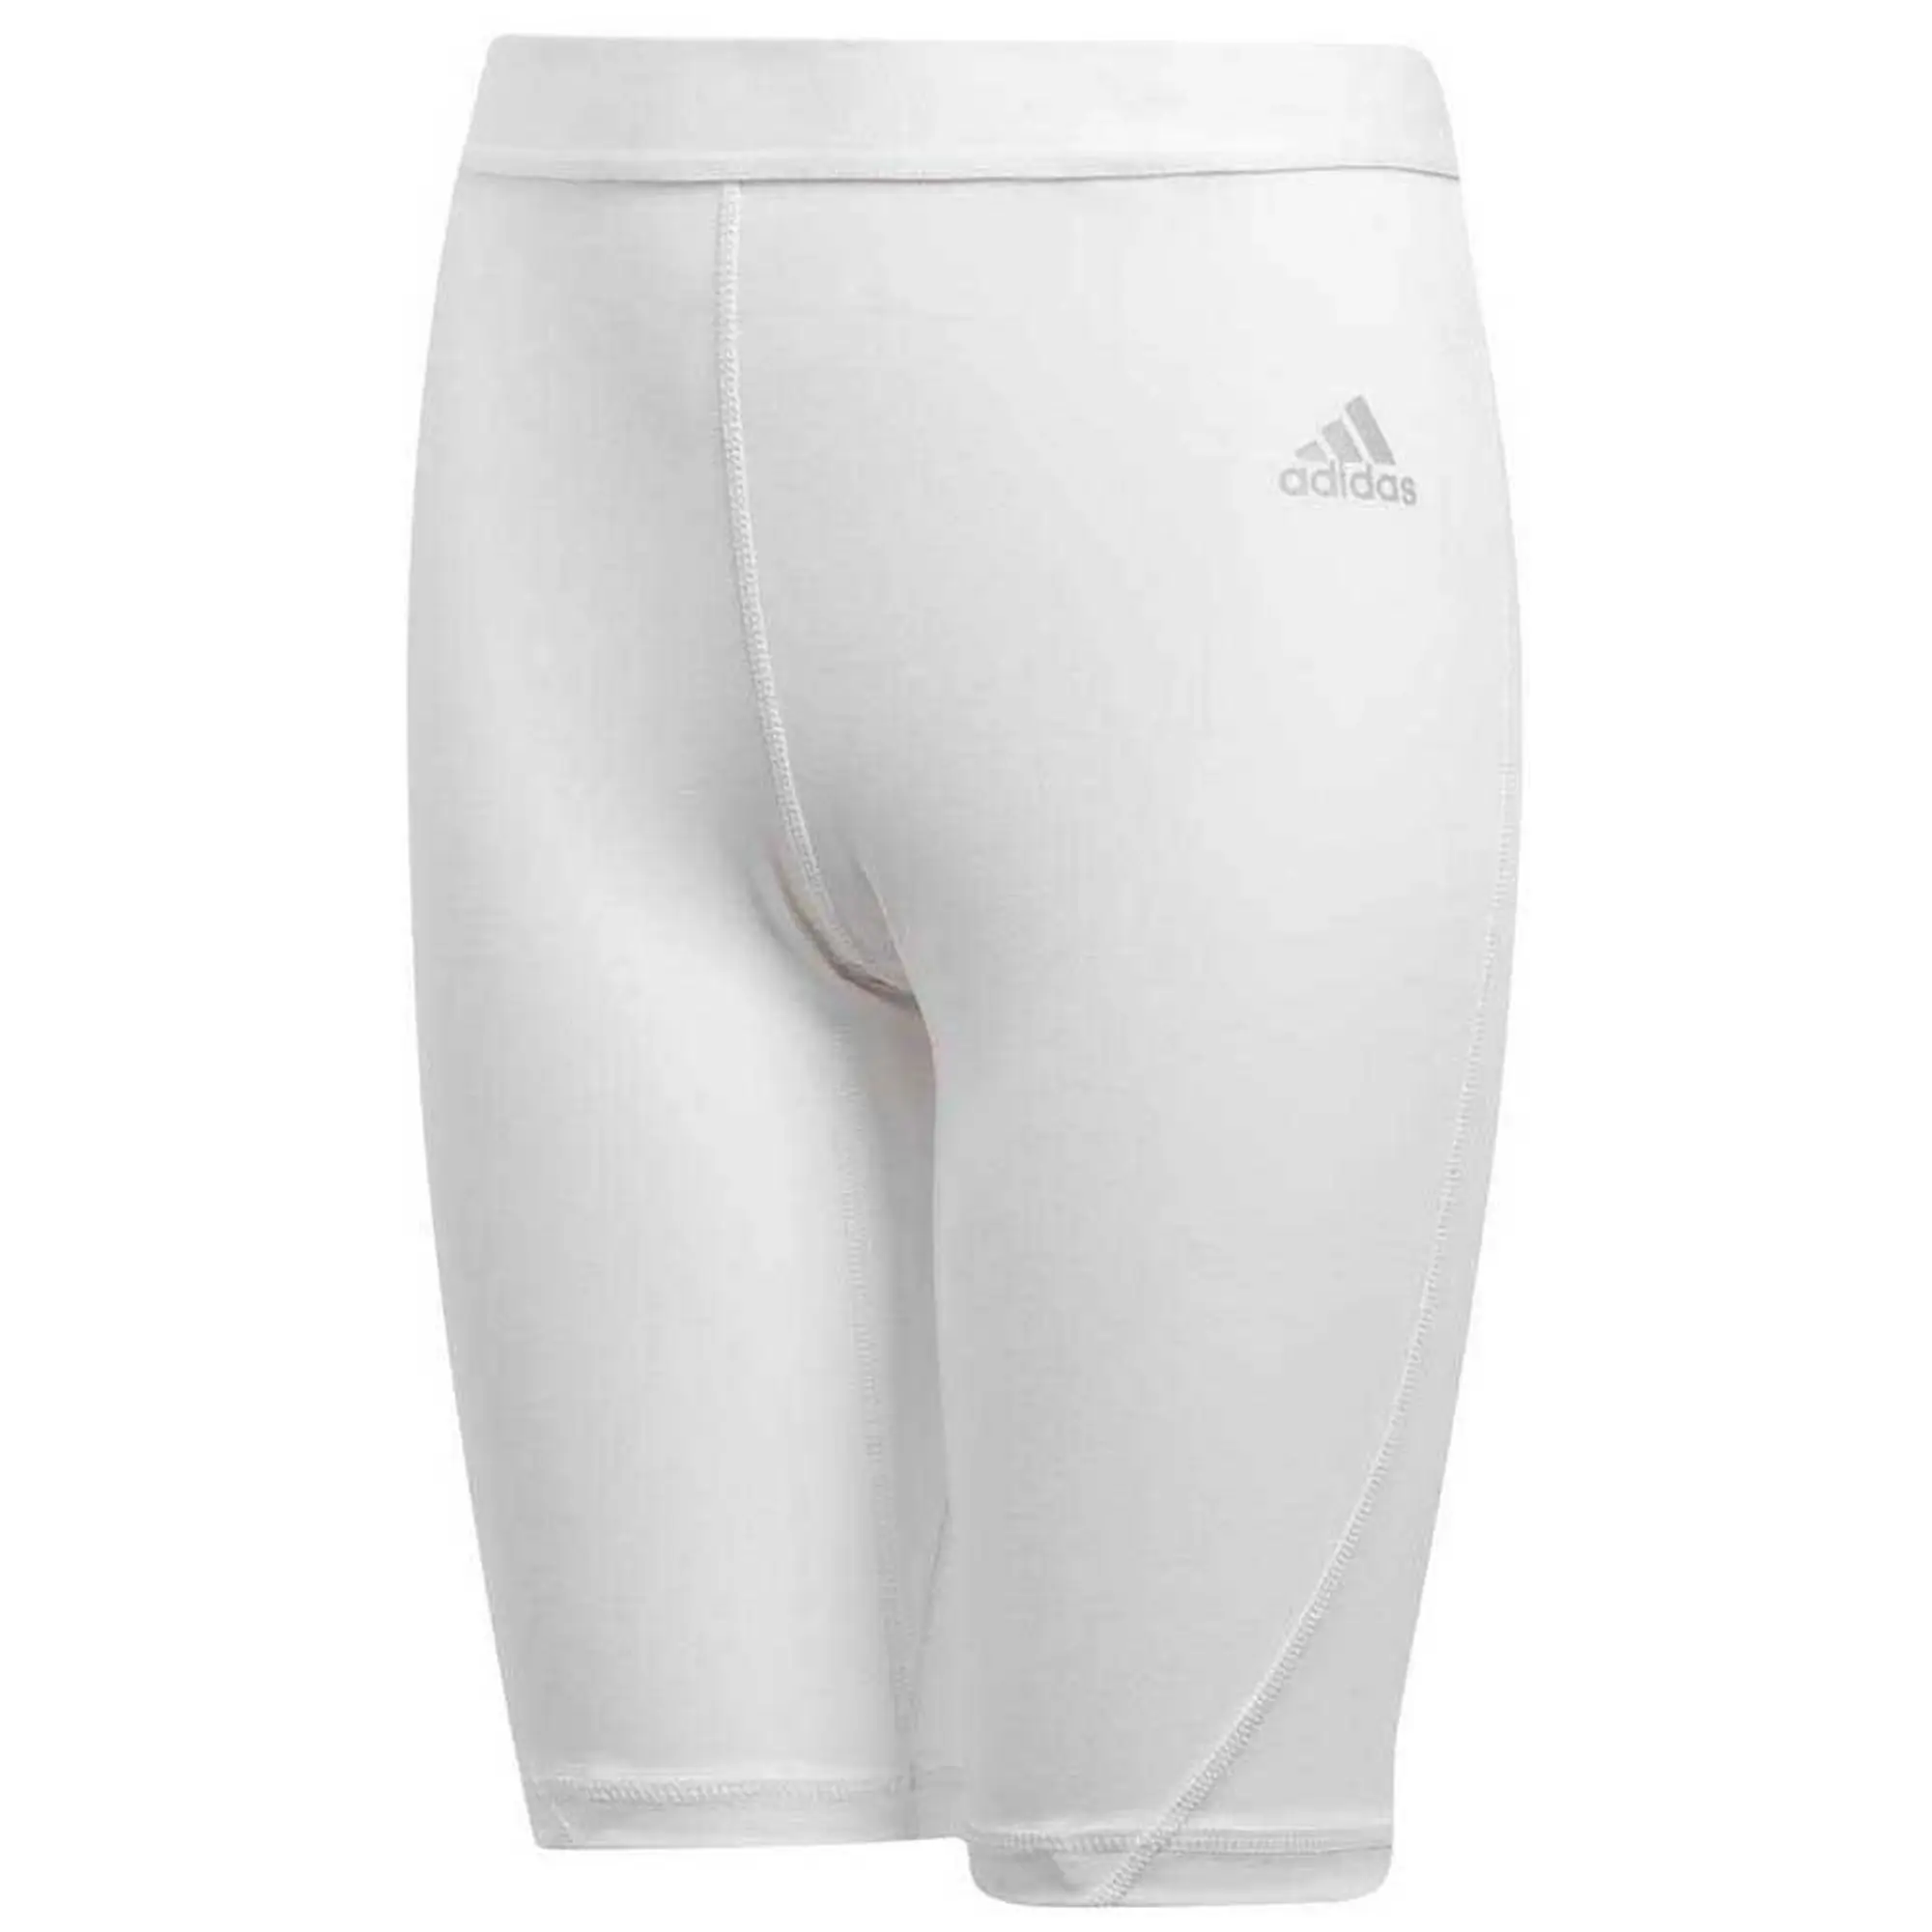 Adidas Baselayer Tights Climacool Alphaskin - White